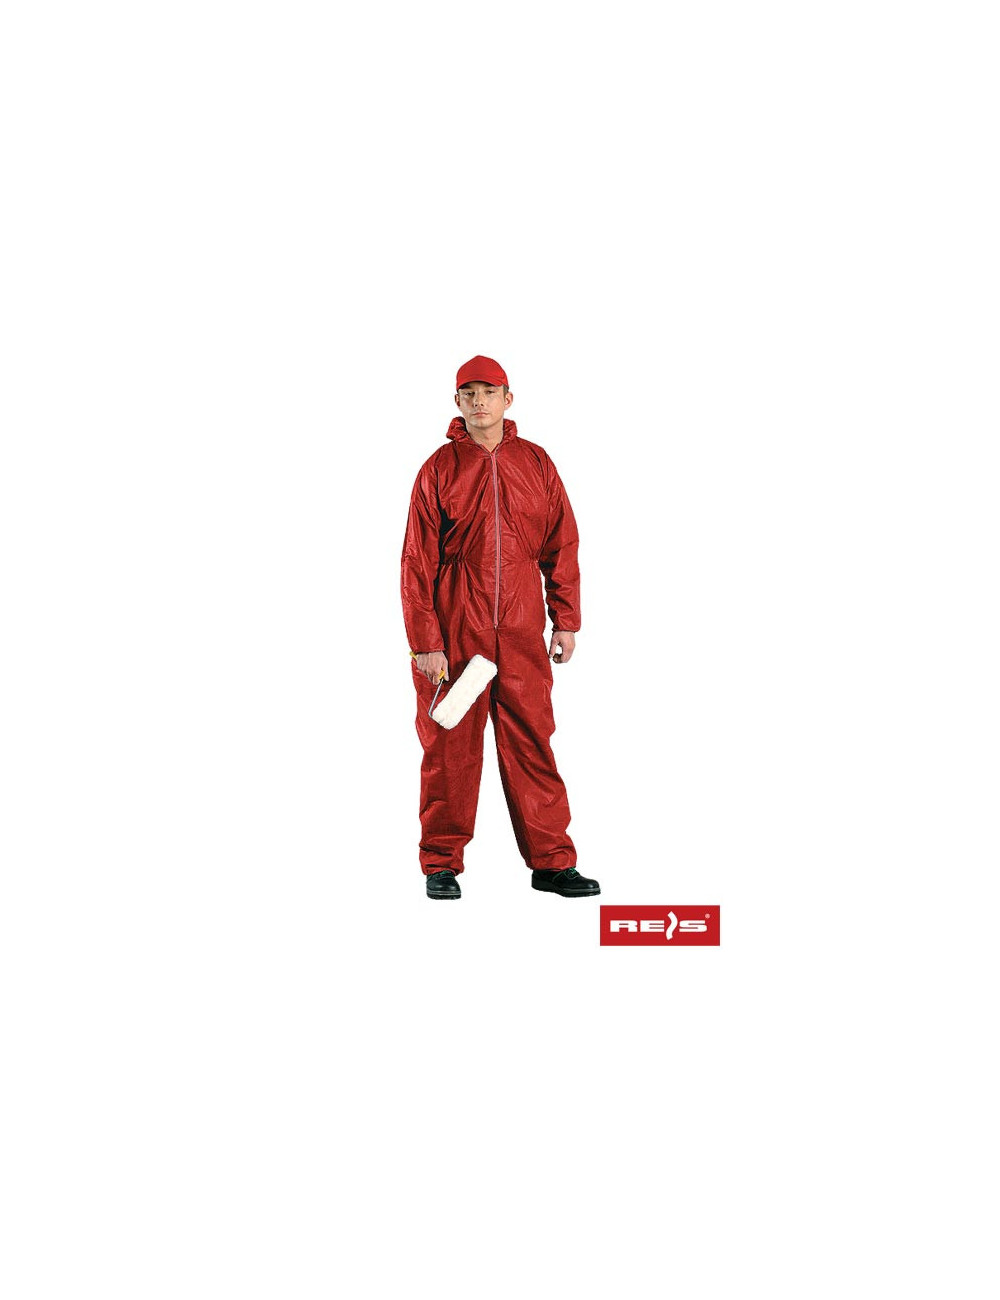 Roter Overall von Reis